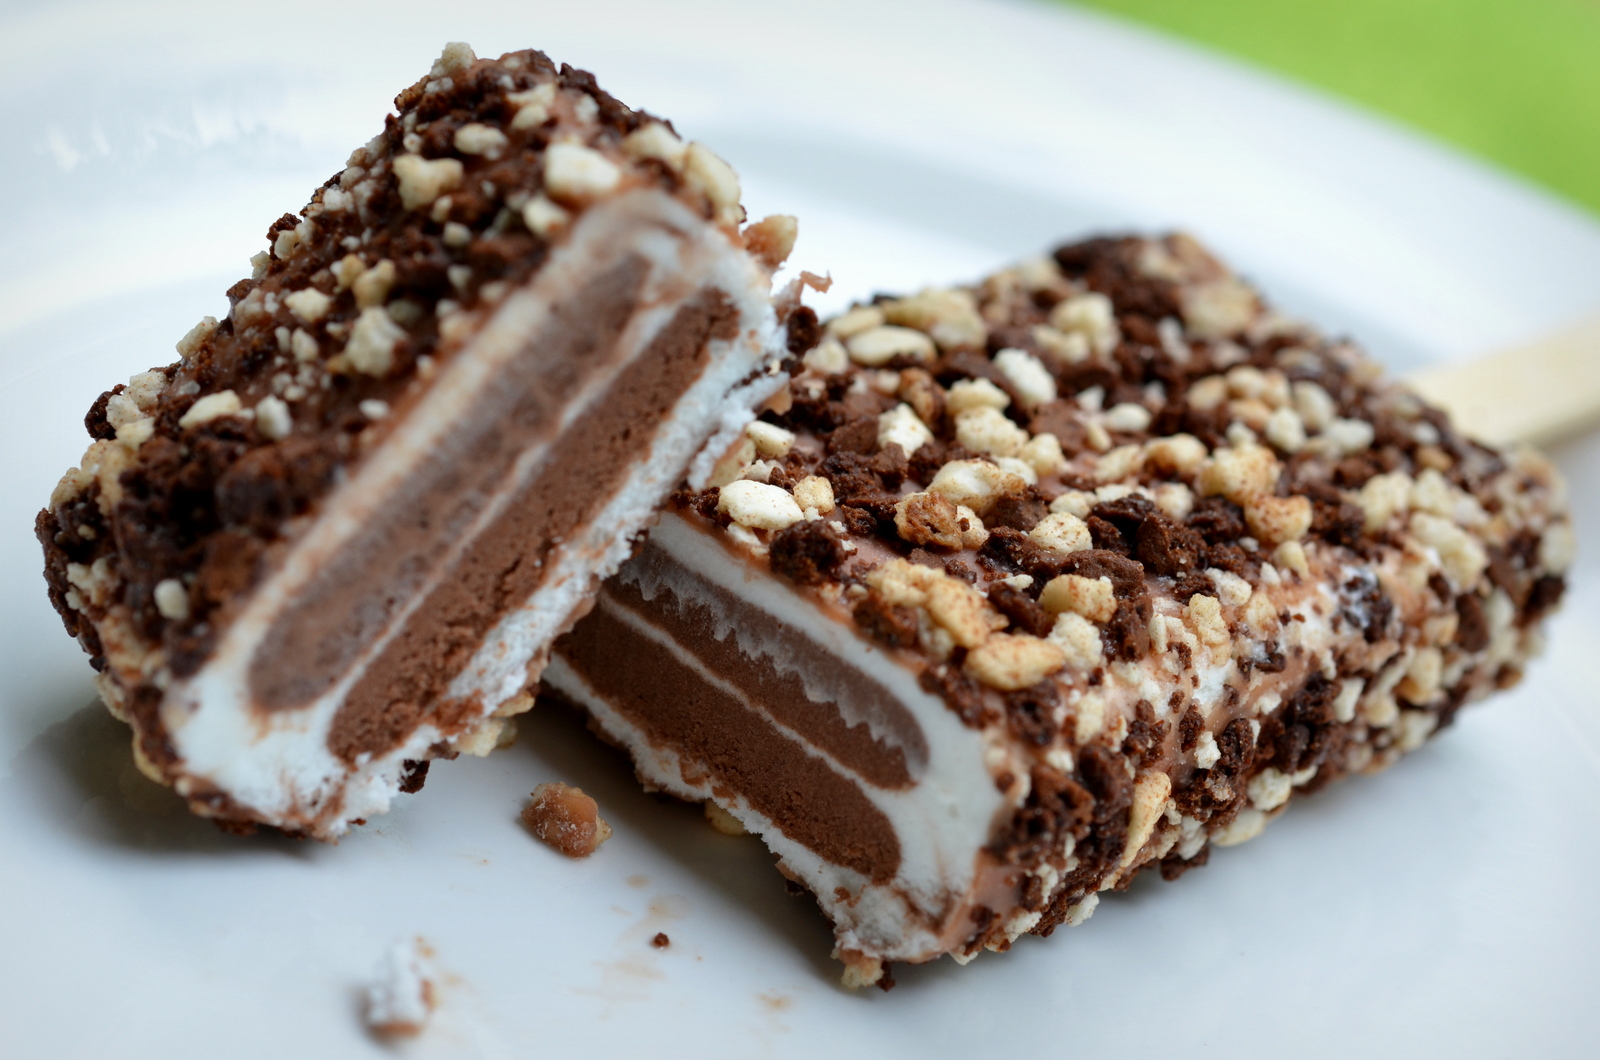 food and ice cream recipes: REVIEW: Good Humor Chocolate Eclair Ice